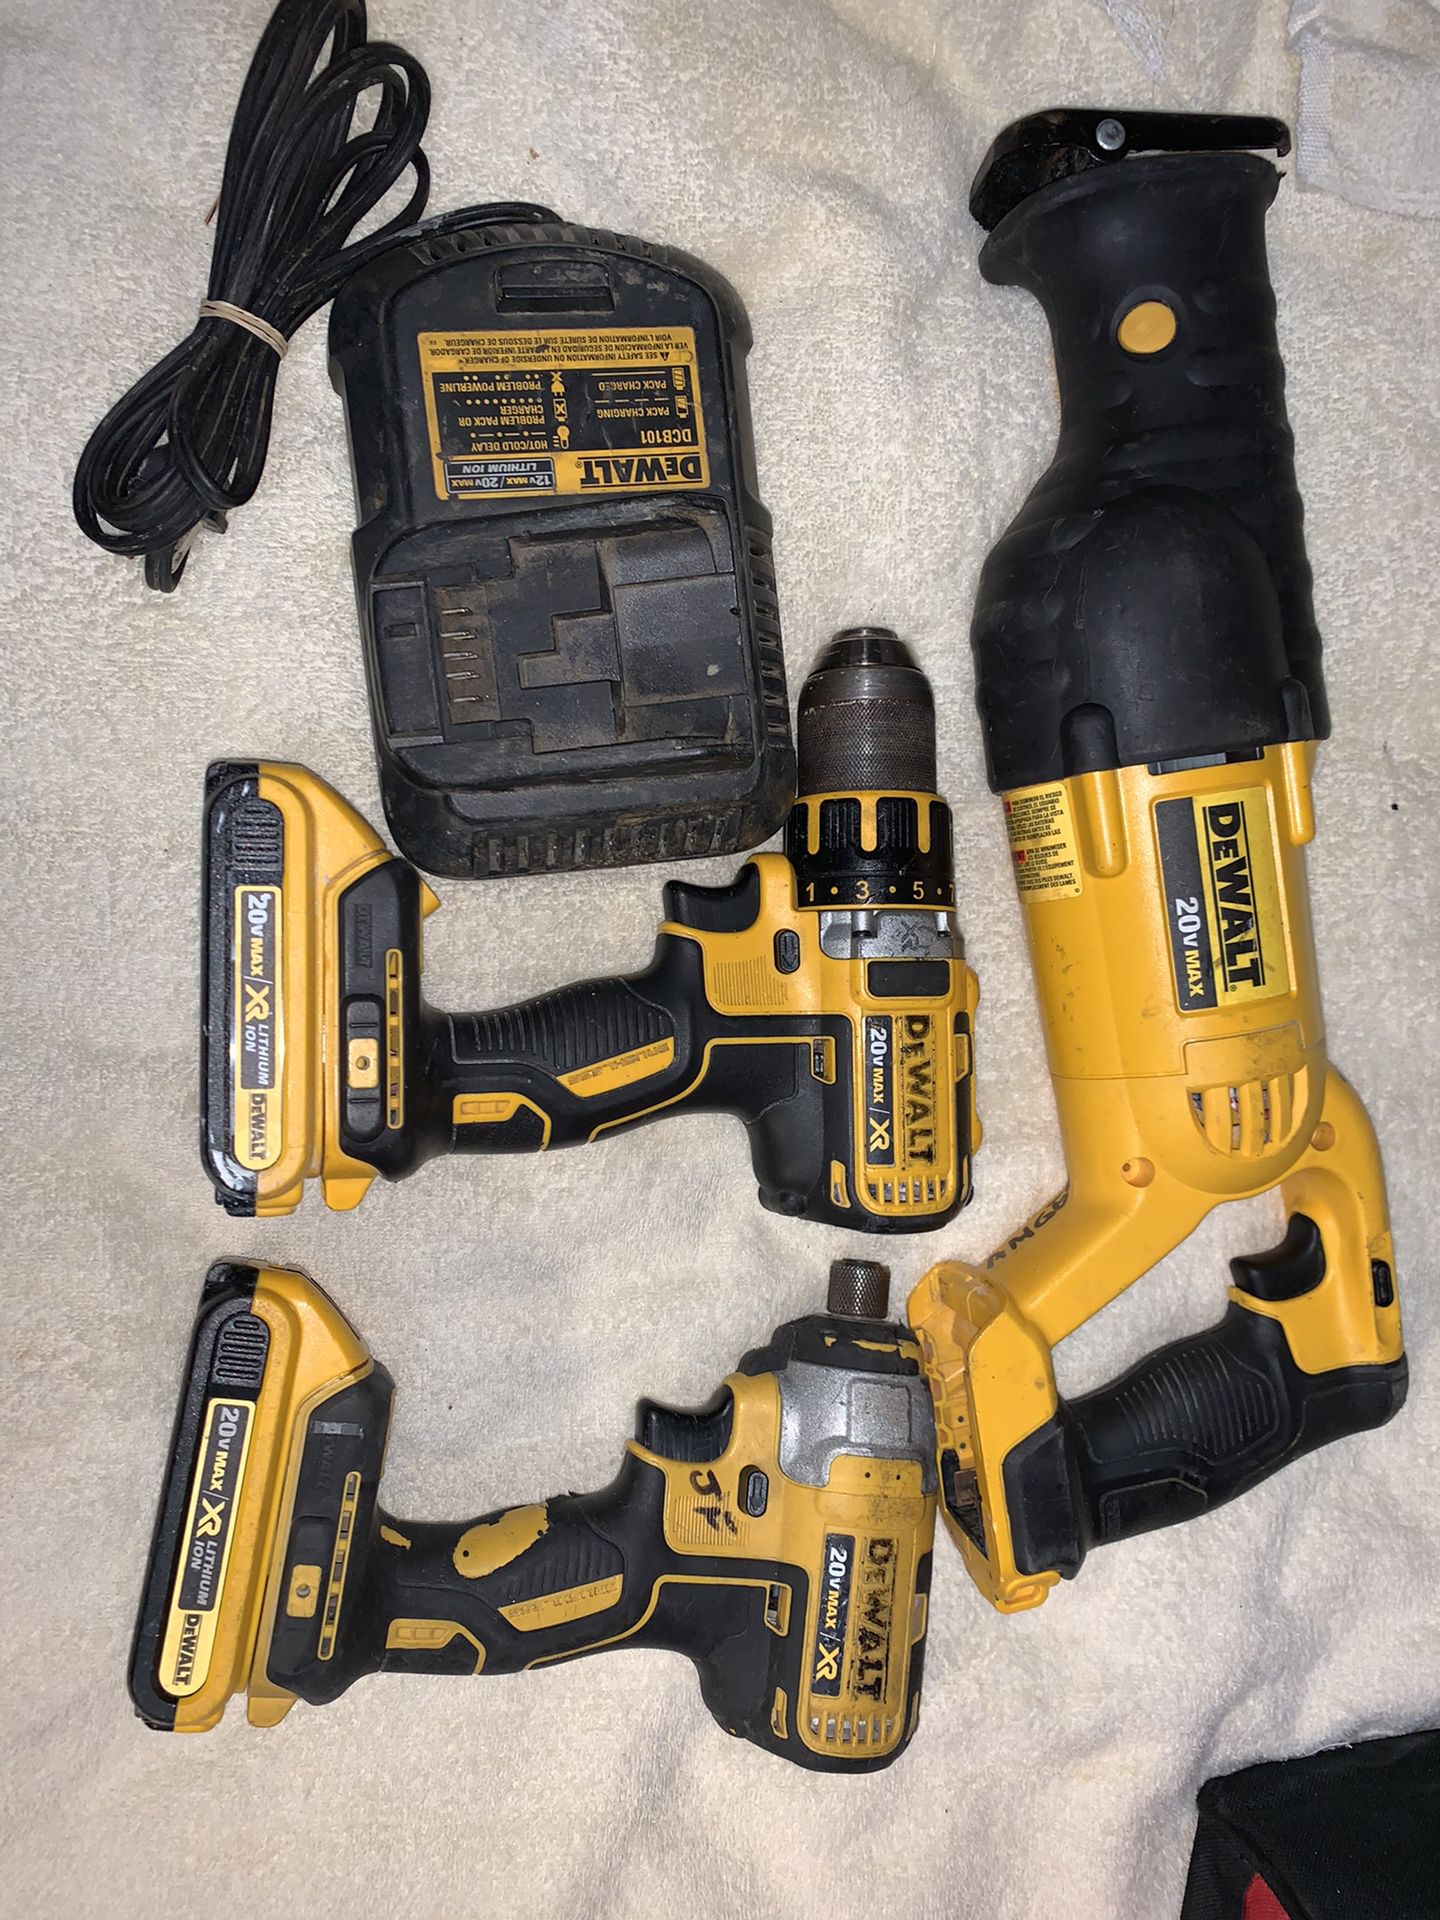 Dewalt tools 20v reciprocating saw drill and hex impact led not working on impact